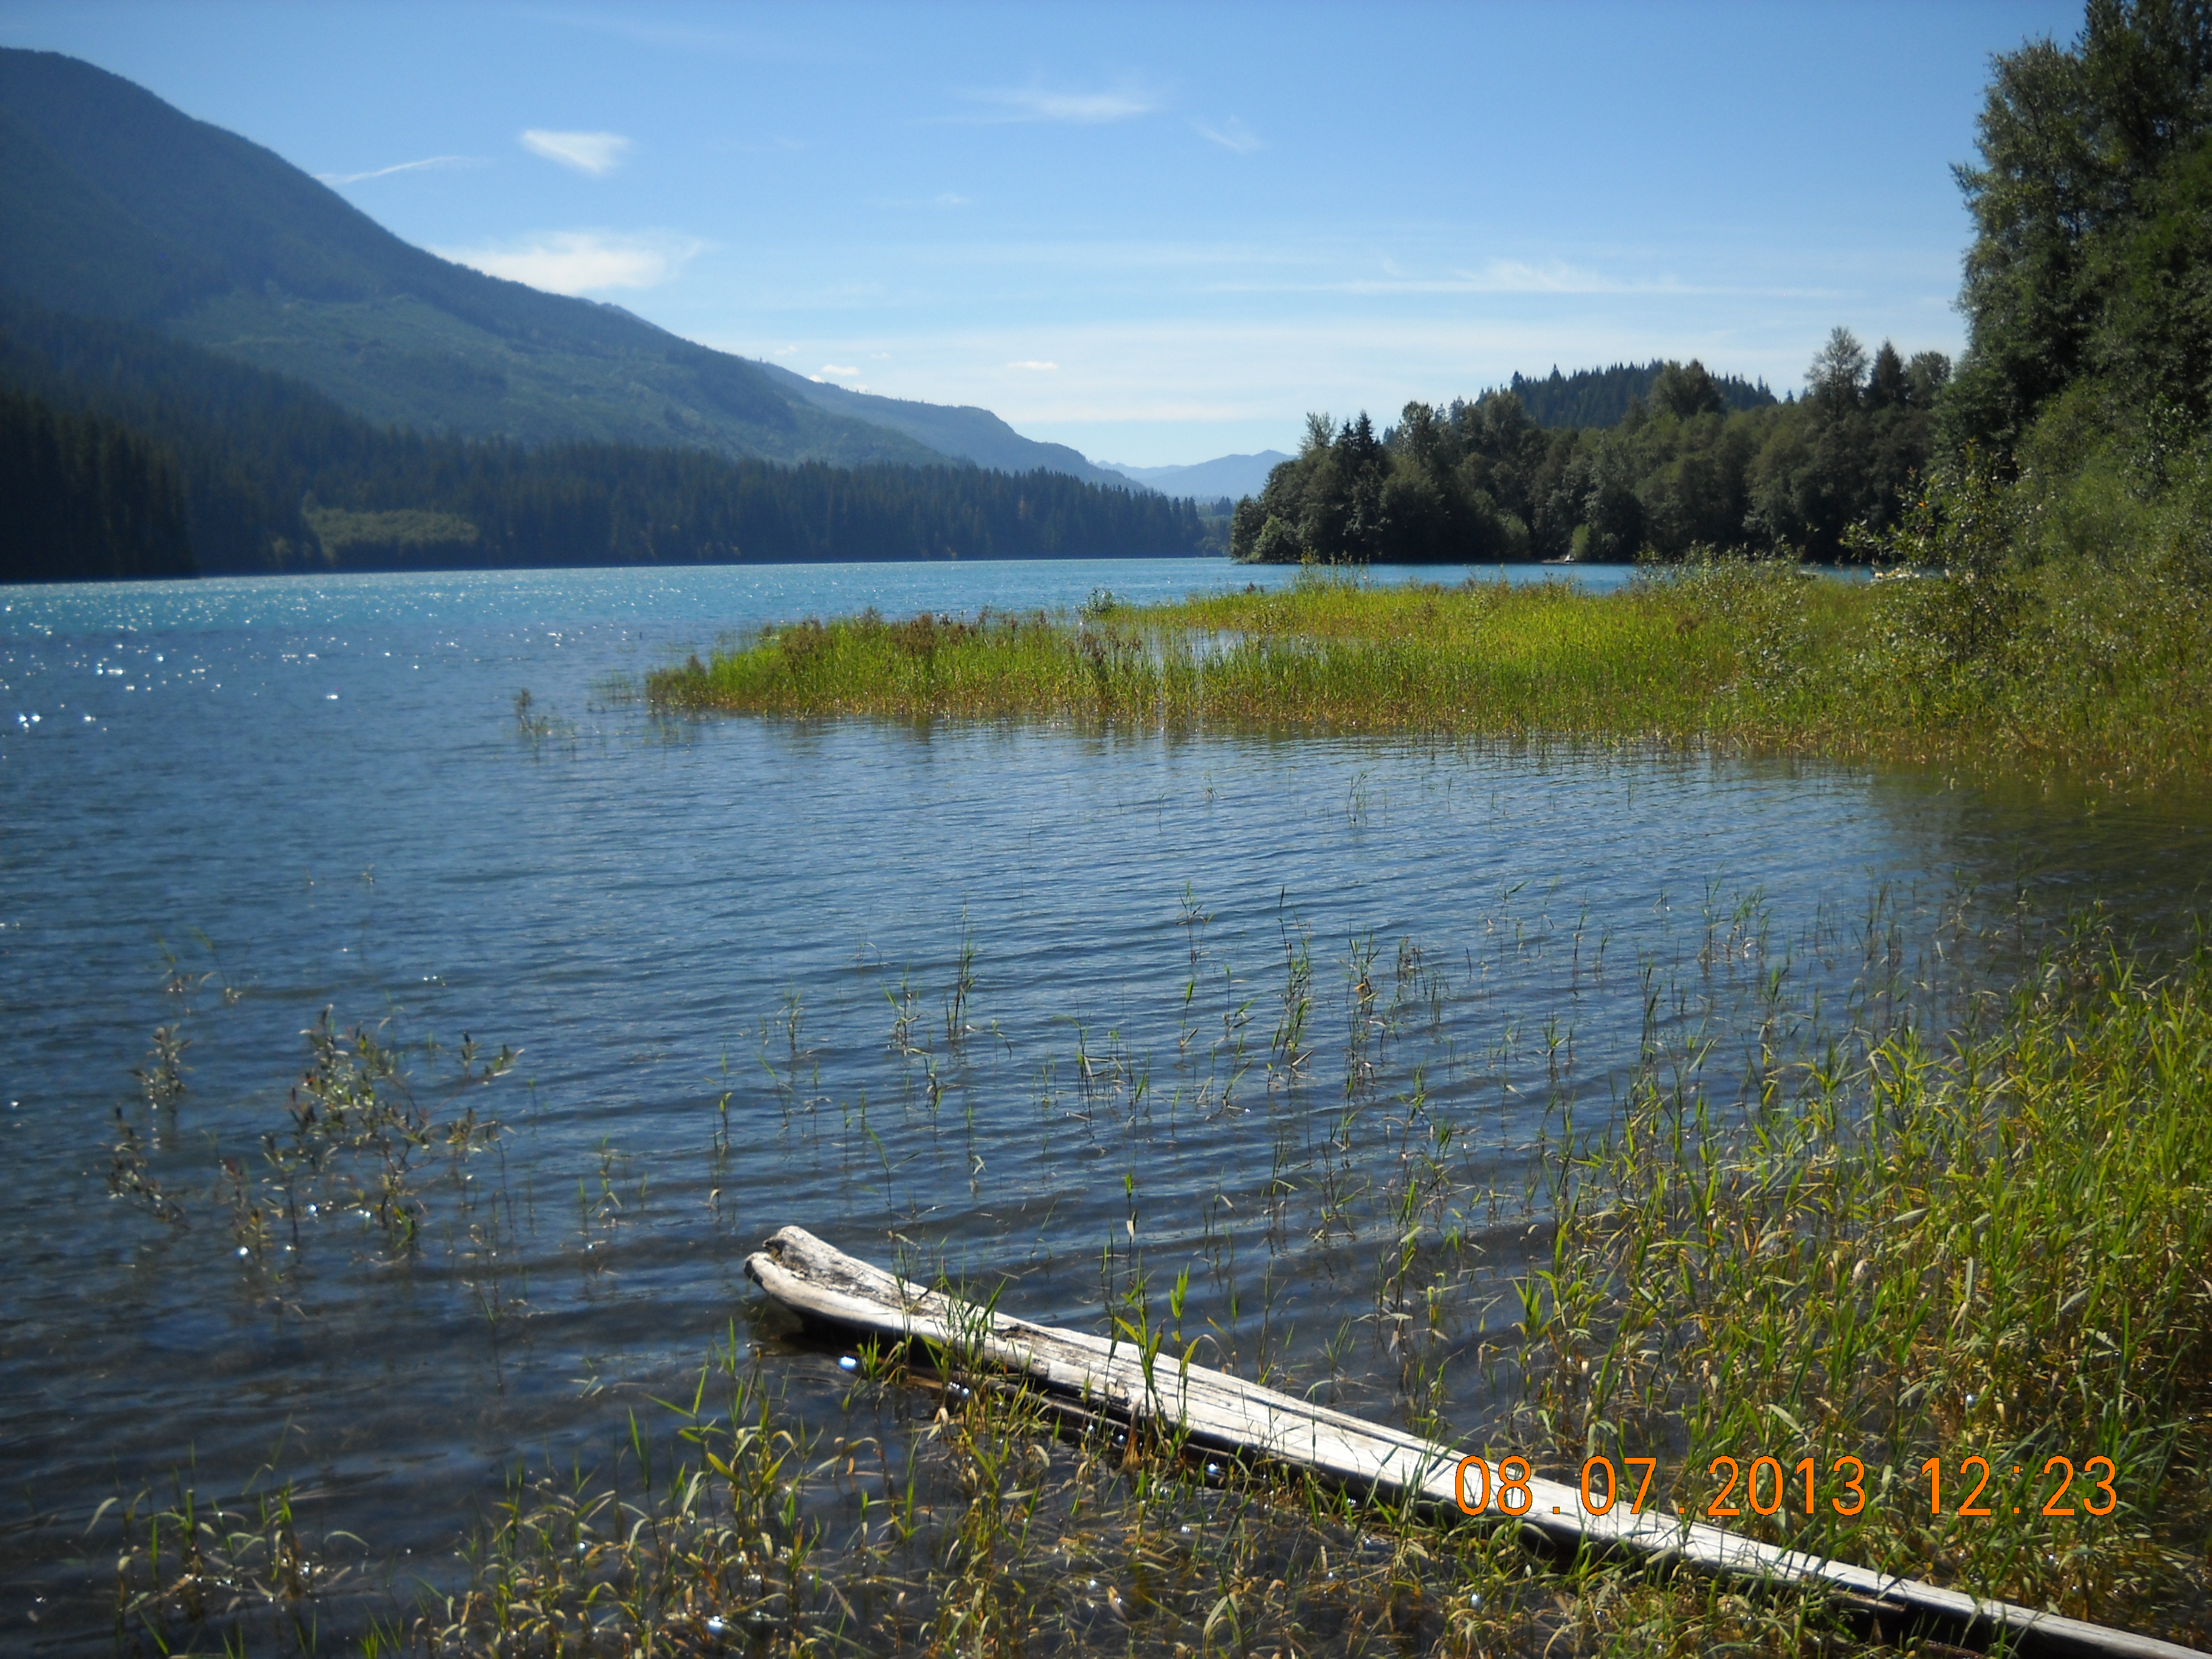 Baker Lake on a sunny day. Green water plants poke through the rippling water and a long piece of drift wood floats.